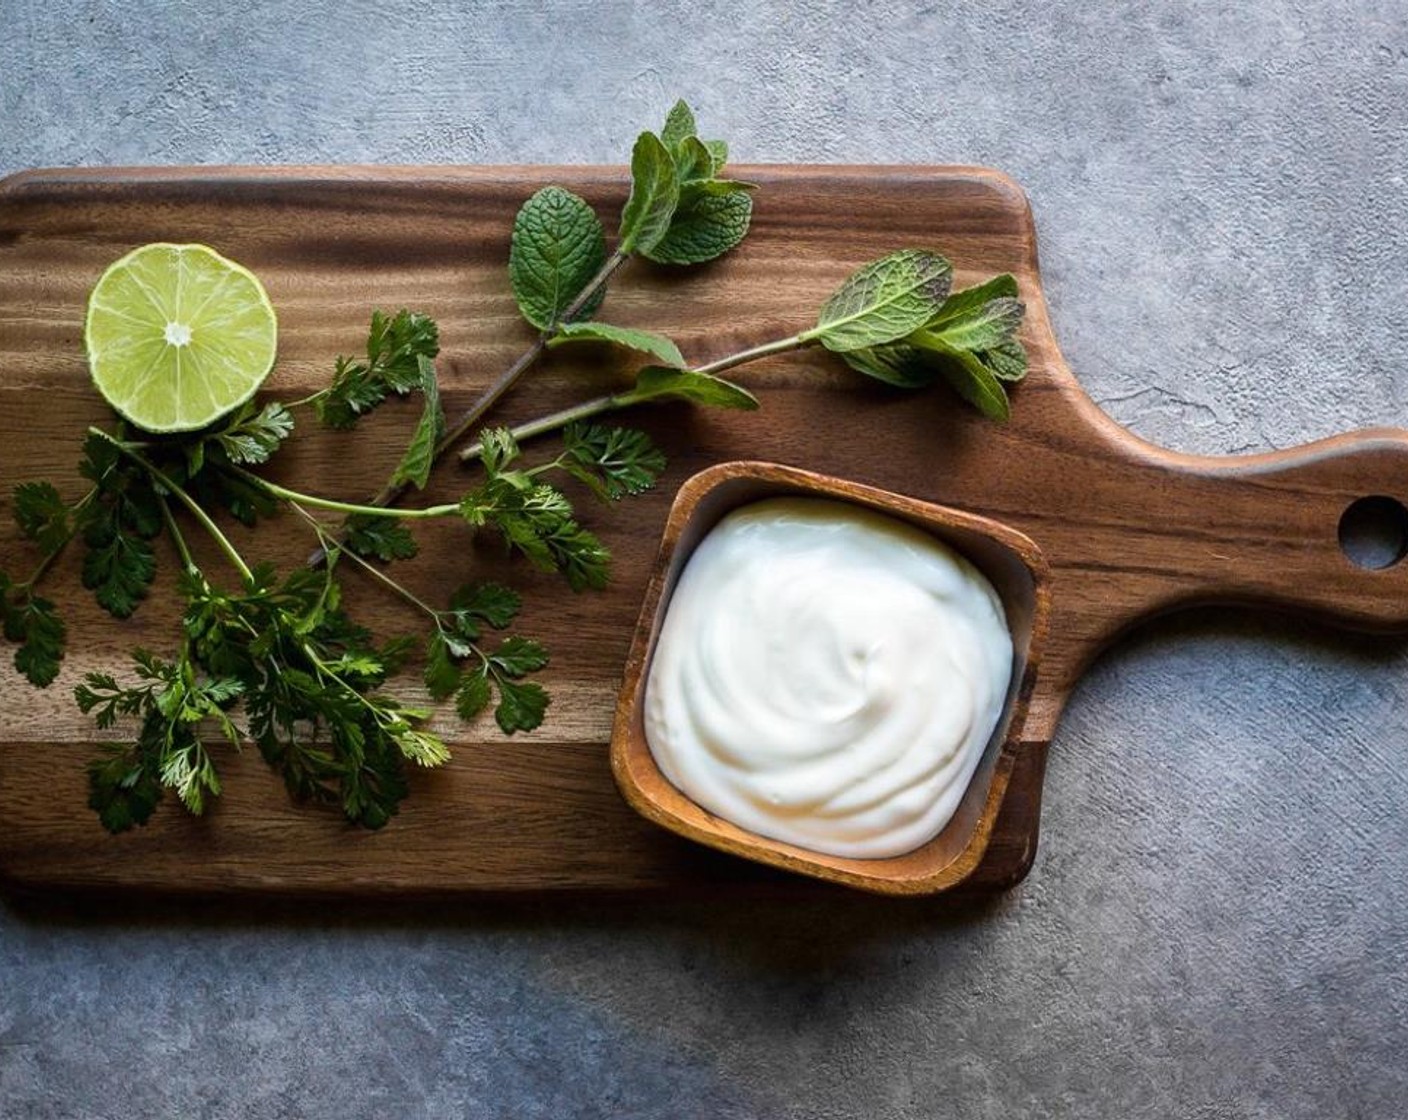 step 9 While the fritters fry, you can make the yogurt sauce, Greek Yogurt (1 cup), Fresh Cilantro (1 Tbsp), chopped Fresh Mint (1 tsp), Fine Salt (1 pinch) and Lime (1/2) in a small bowl until well combined, reserve.